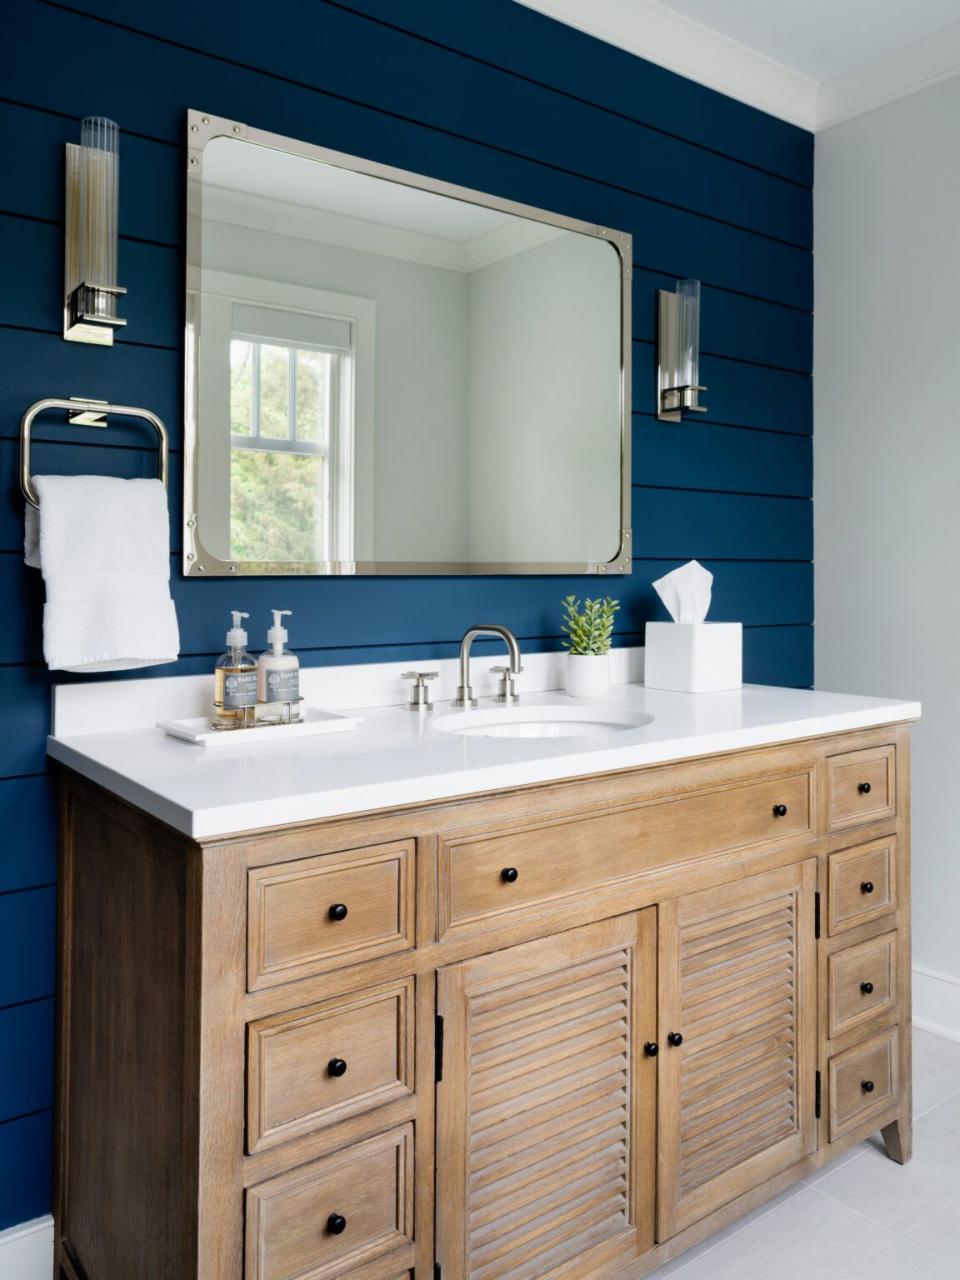 Accent With Shiplap Navy Wall in 2020 Blue bathroom accents, Blue